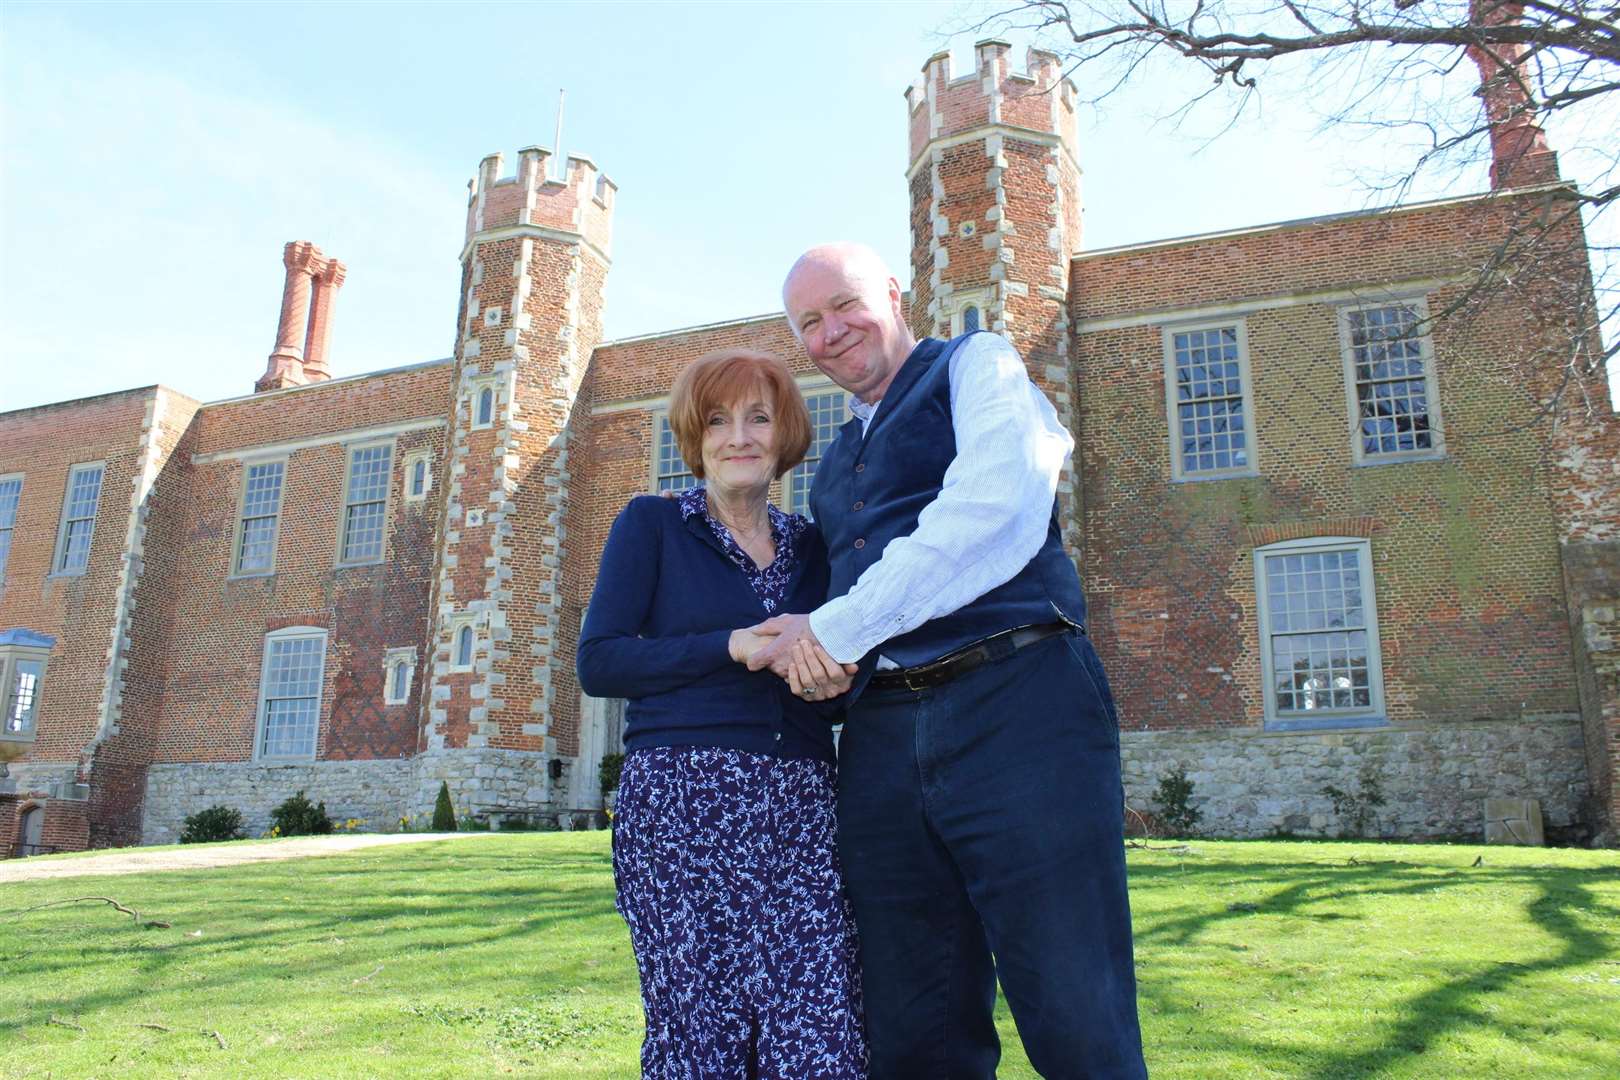 Daniel and Suzanne O'Donoghue have put the former Tudor manor Shurland Hall at Eastchurch on the market. Picture: John Nurden (5377529)